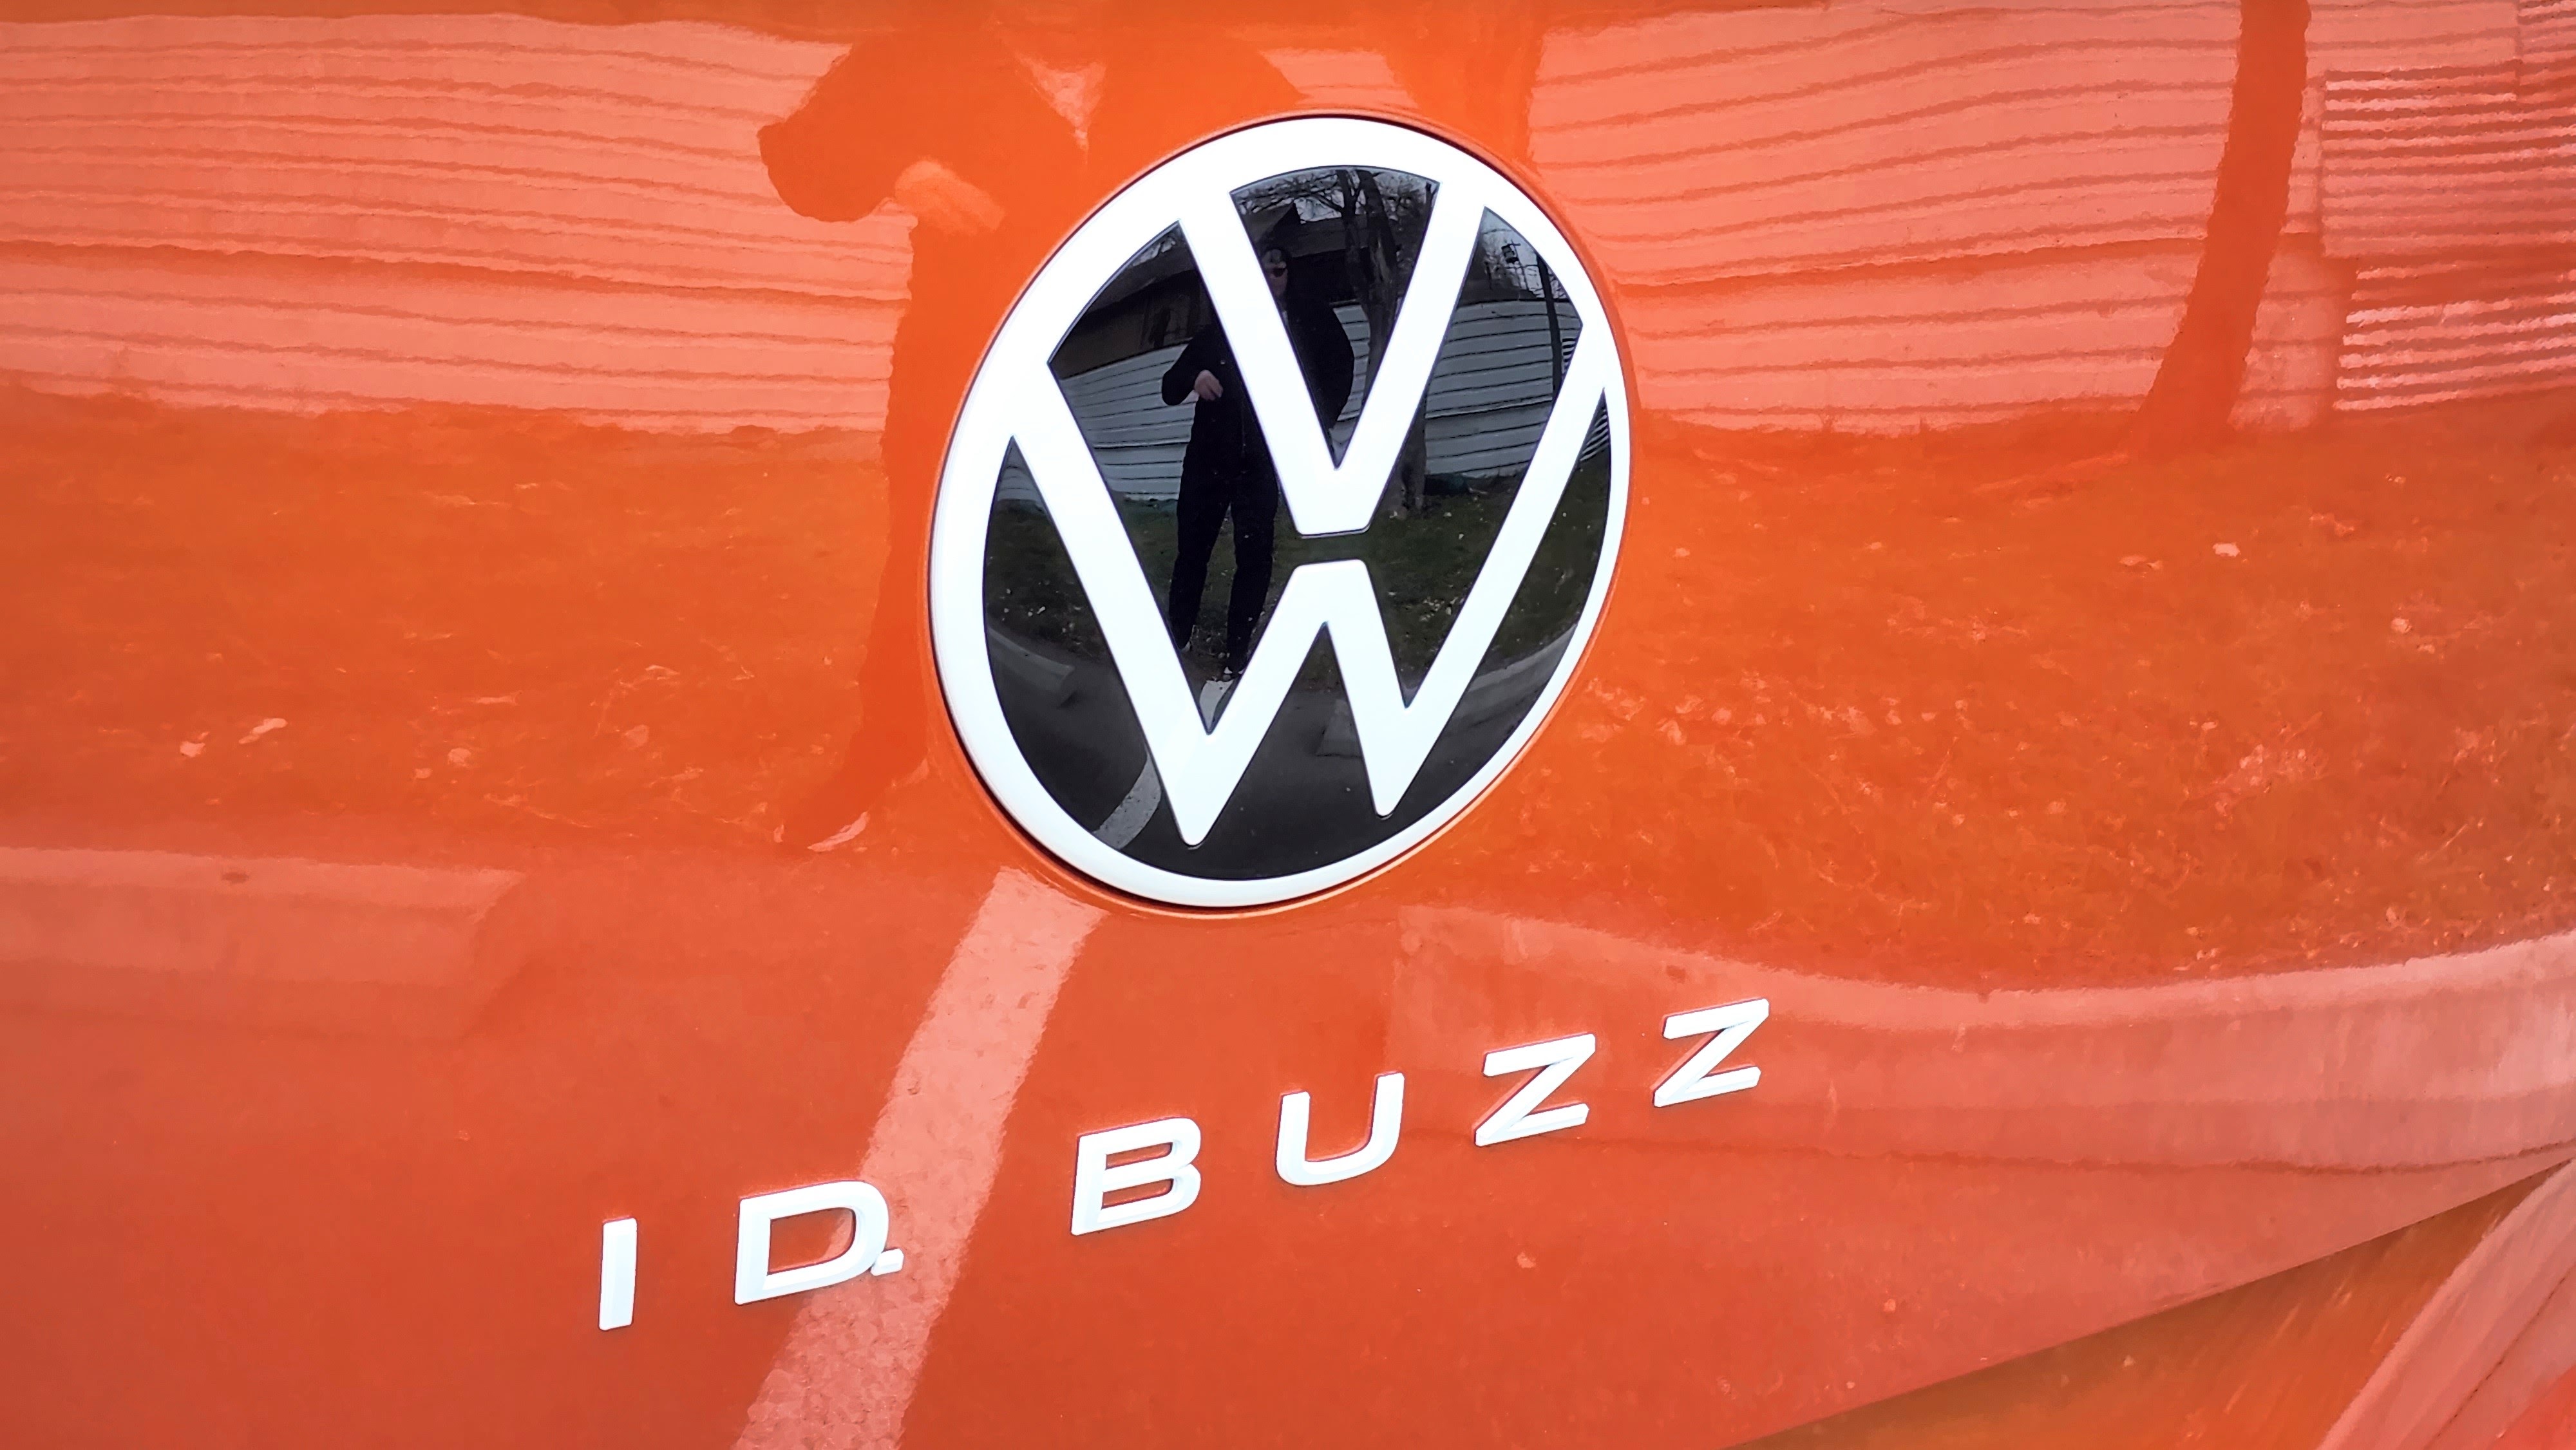 Close-up of ID Buzz logo on rear of vehicle